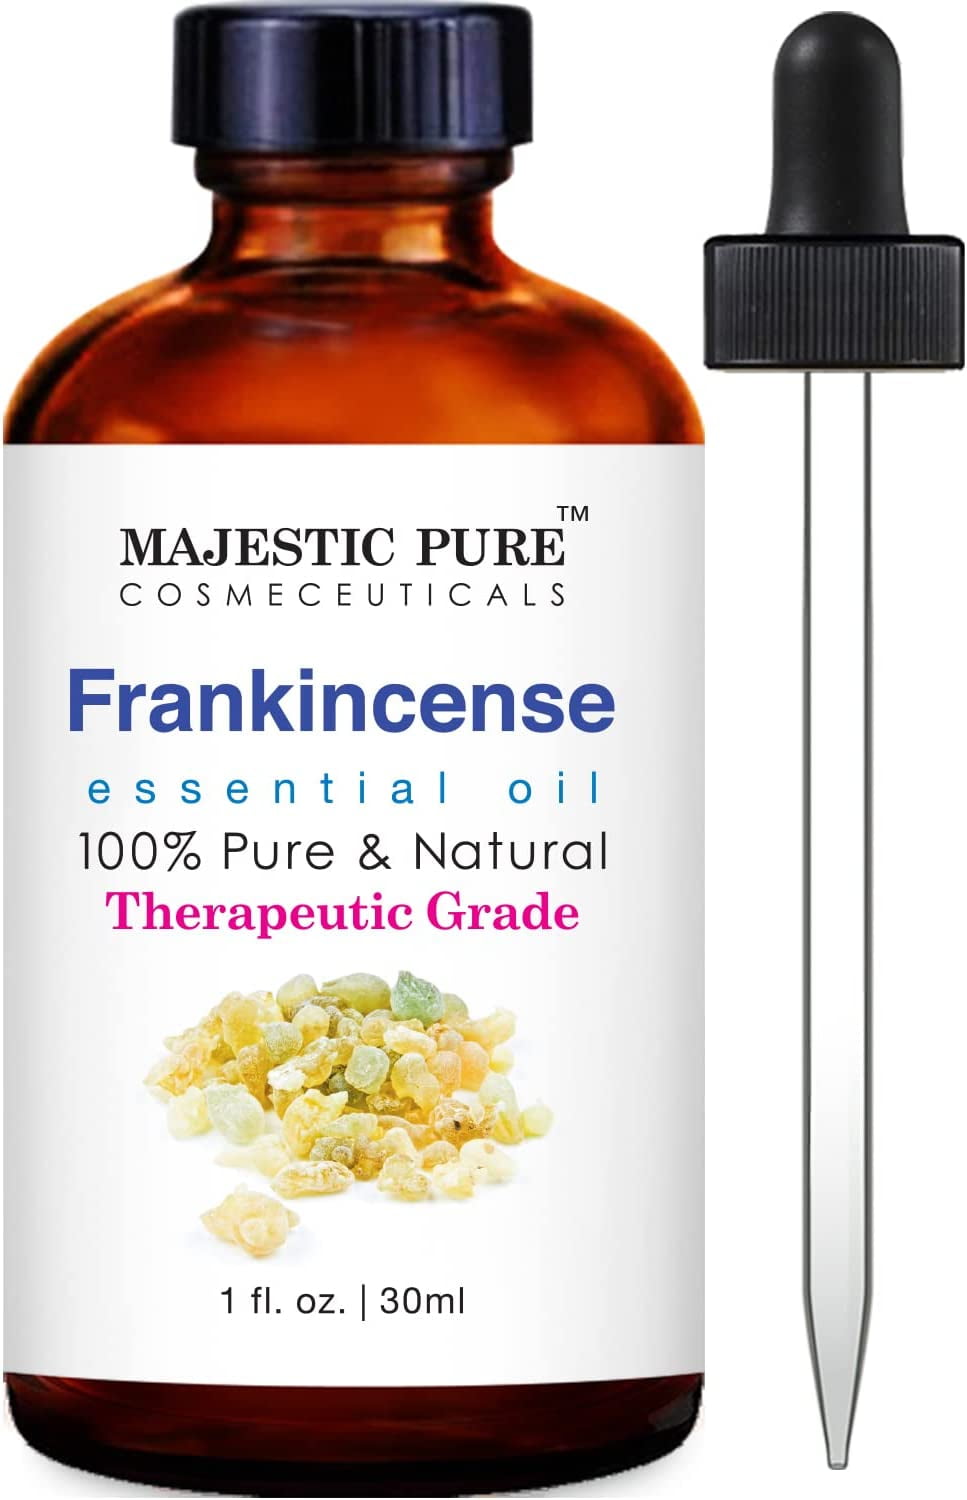 Majestic Pure Frankincense Essential Oil, Therapeutic Grade, Pure and  Natural, for Aromatherapy, Massage, Topical & Household Uses, 1 fl oz